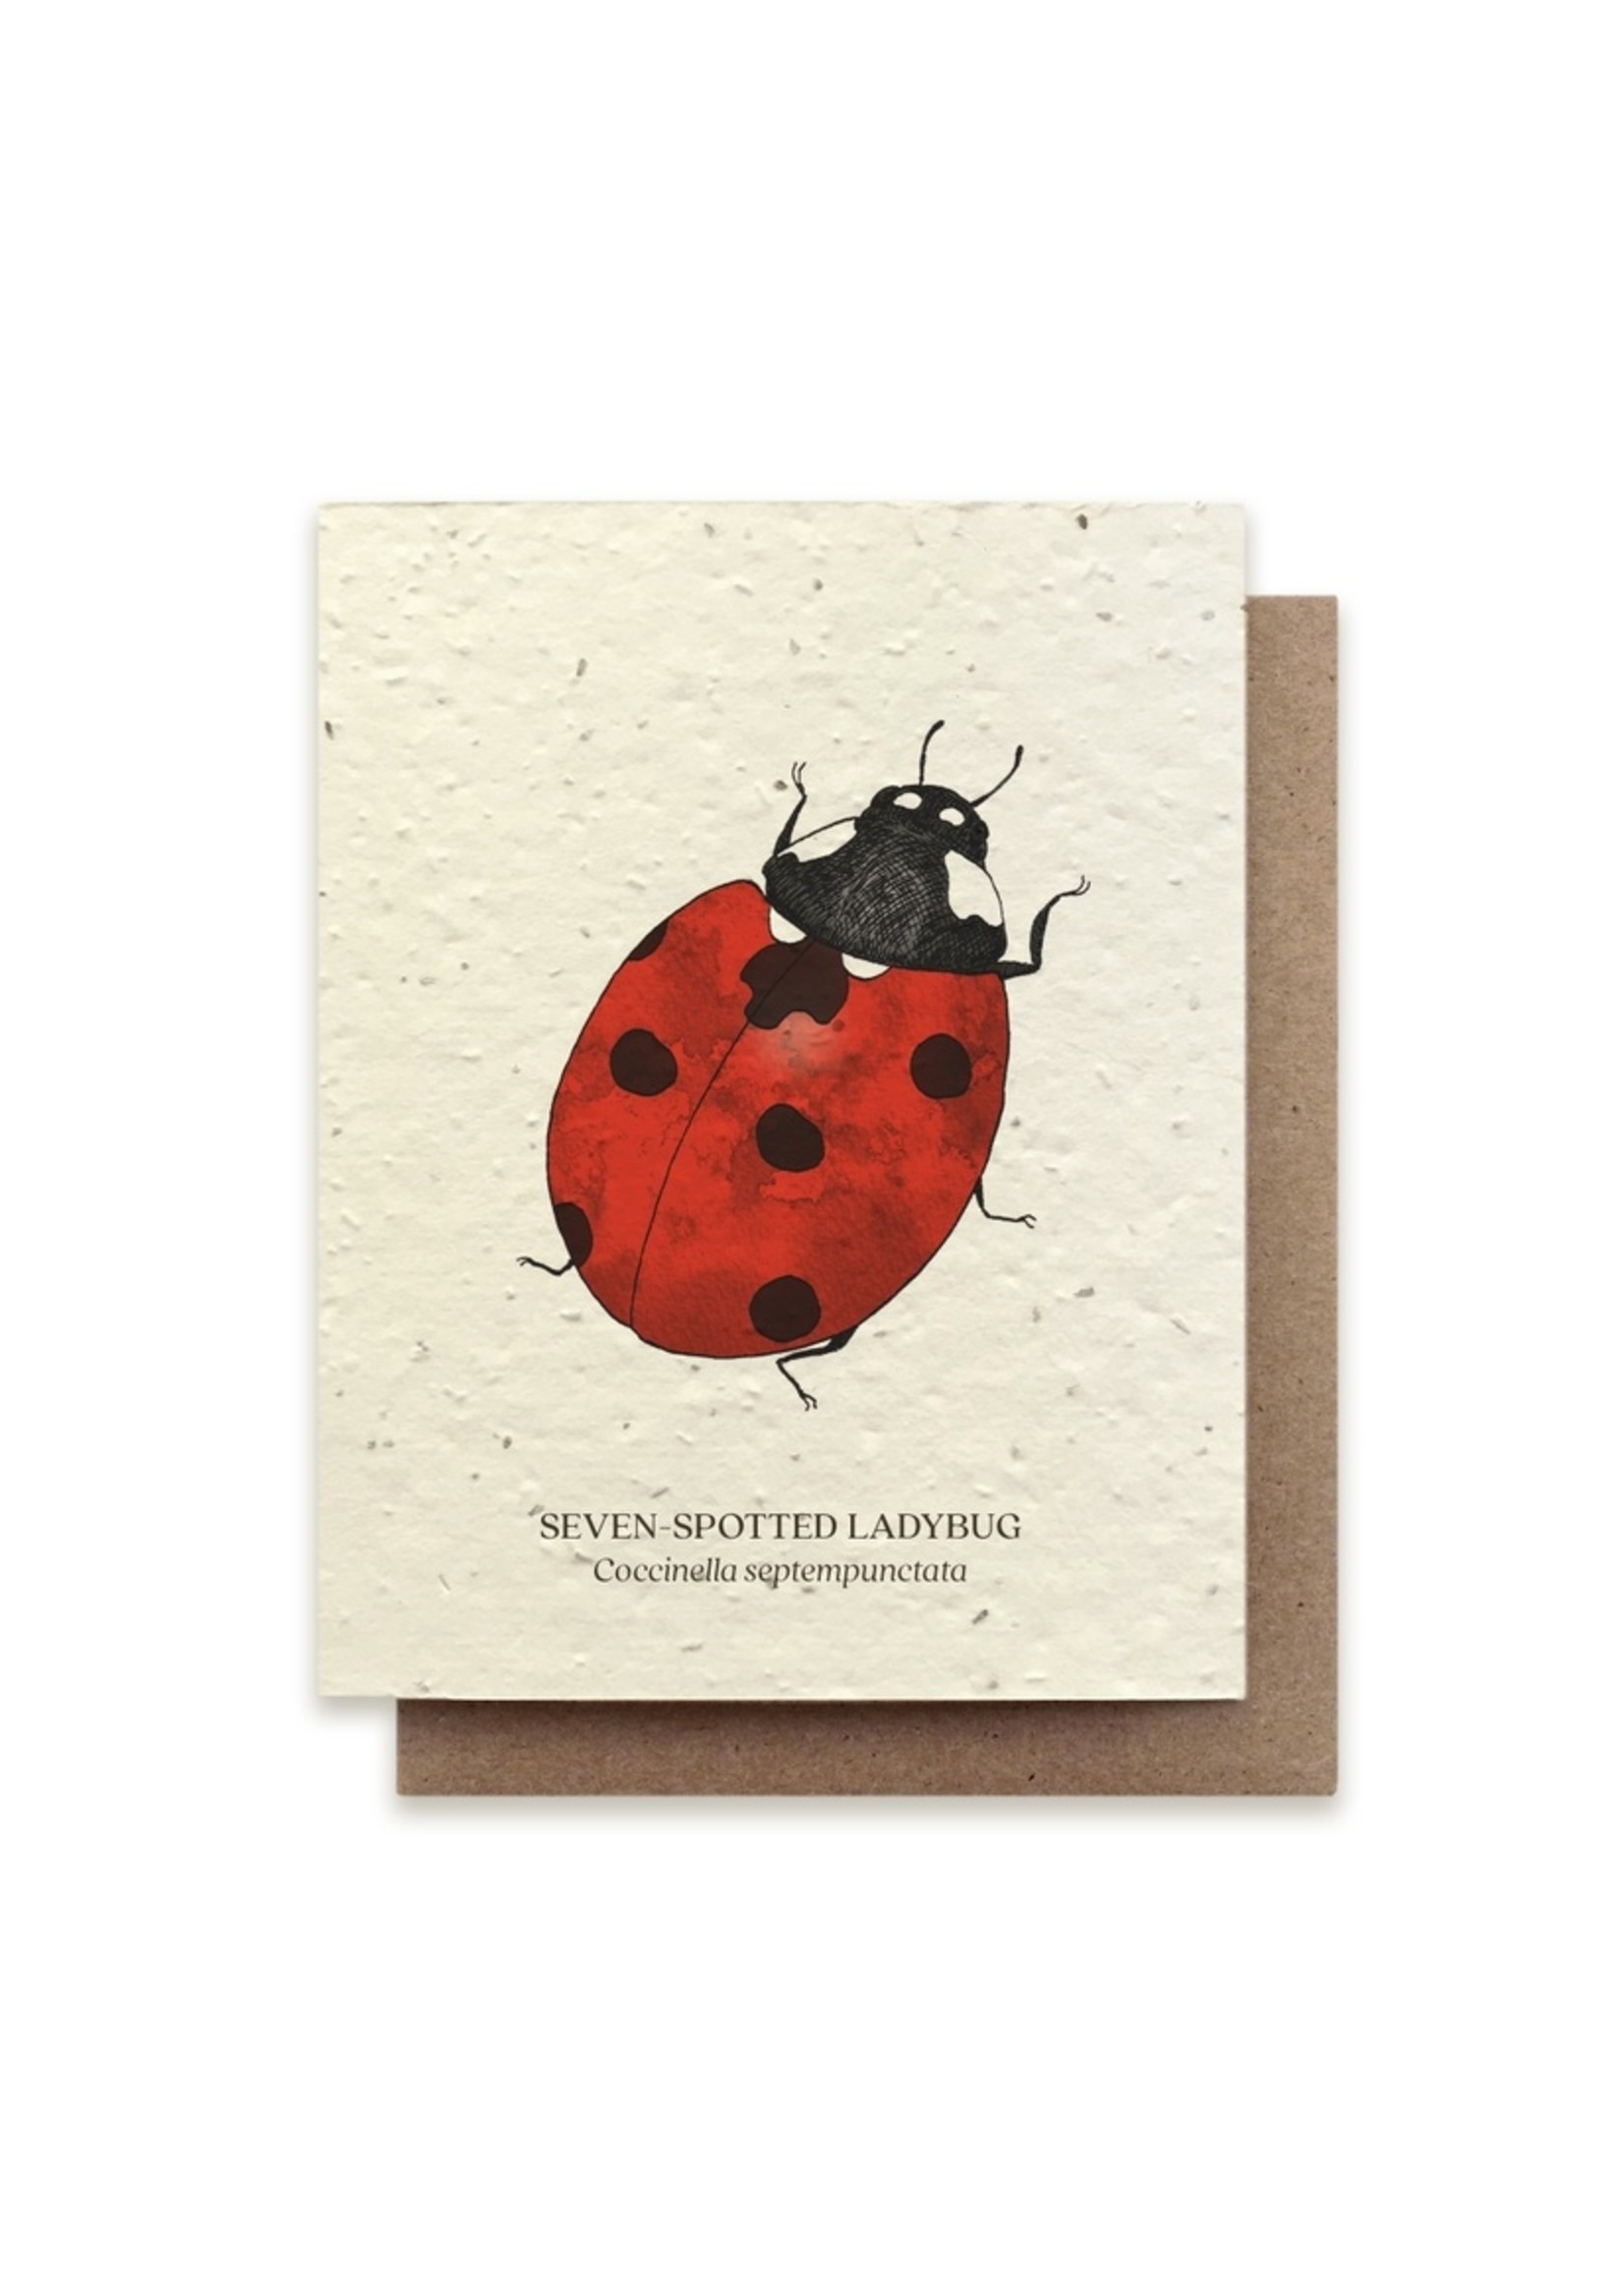 Small Victories The Bower Studio Seed Card Insects